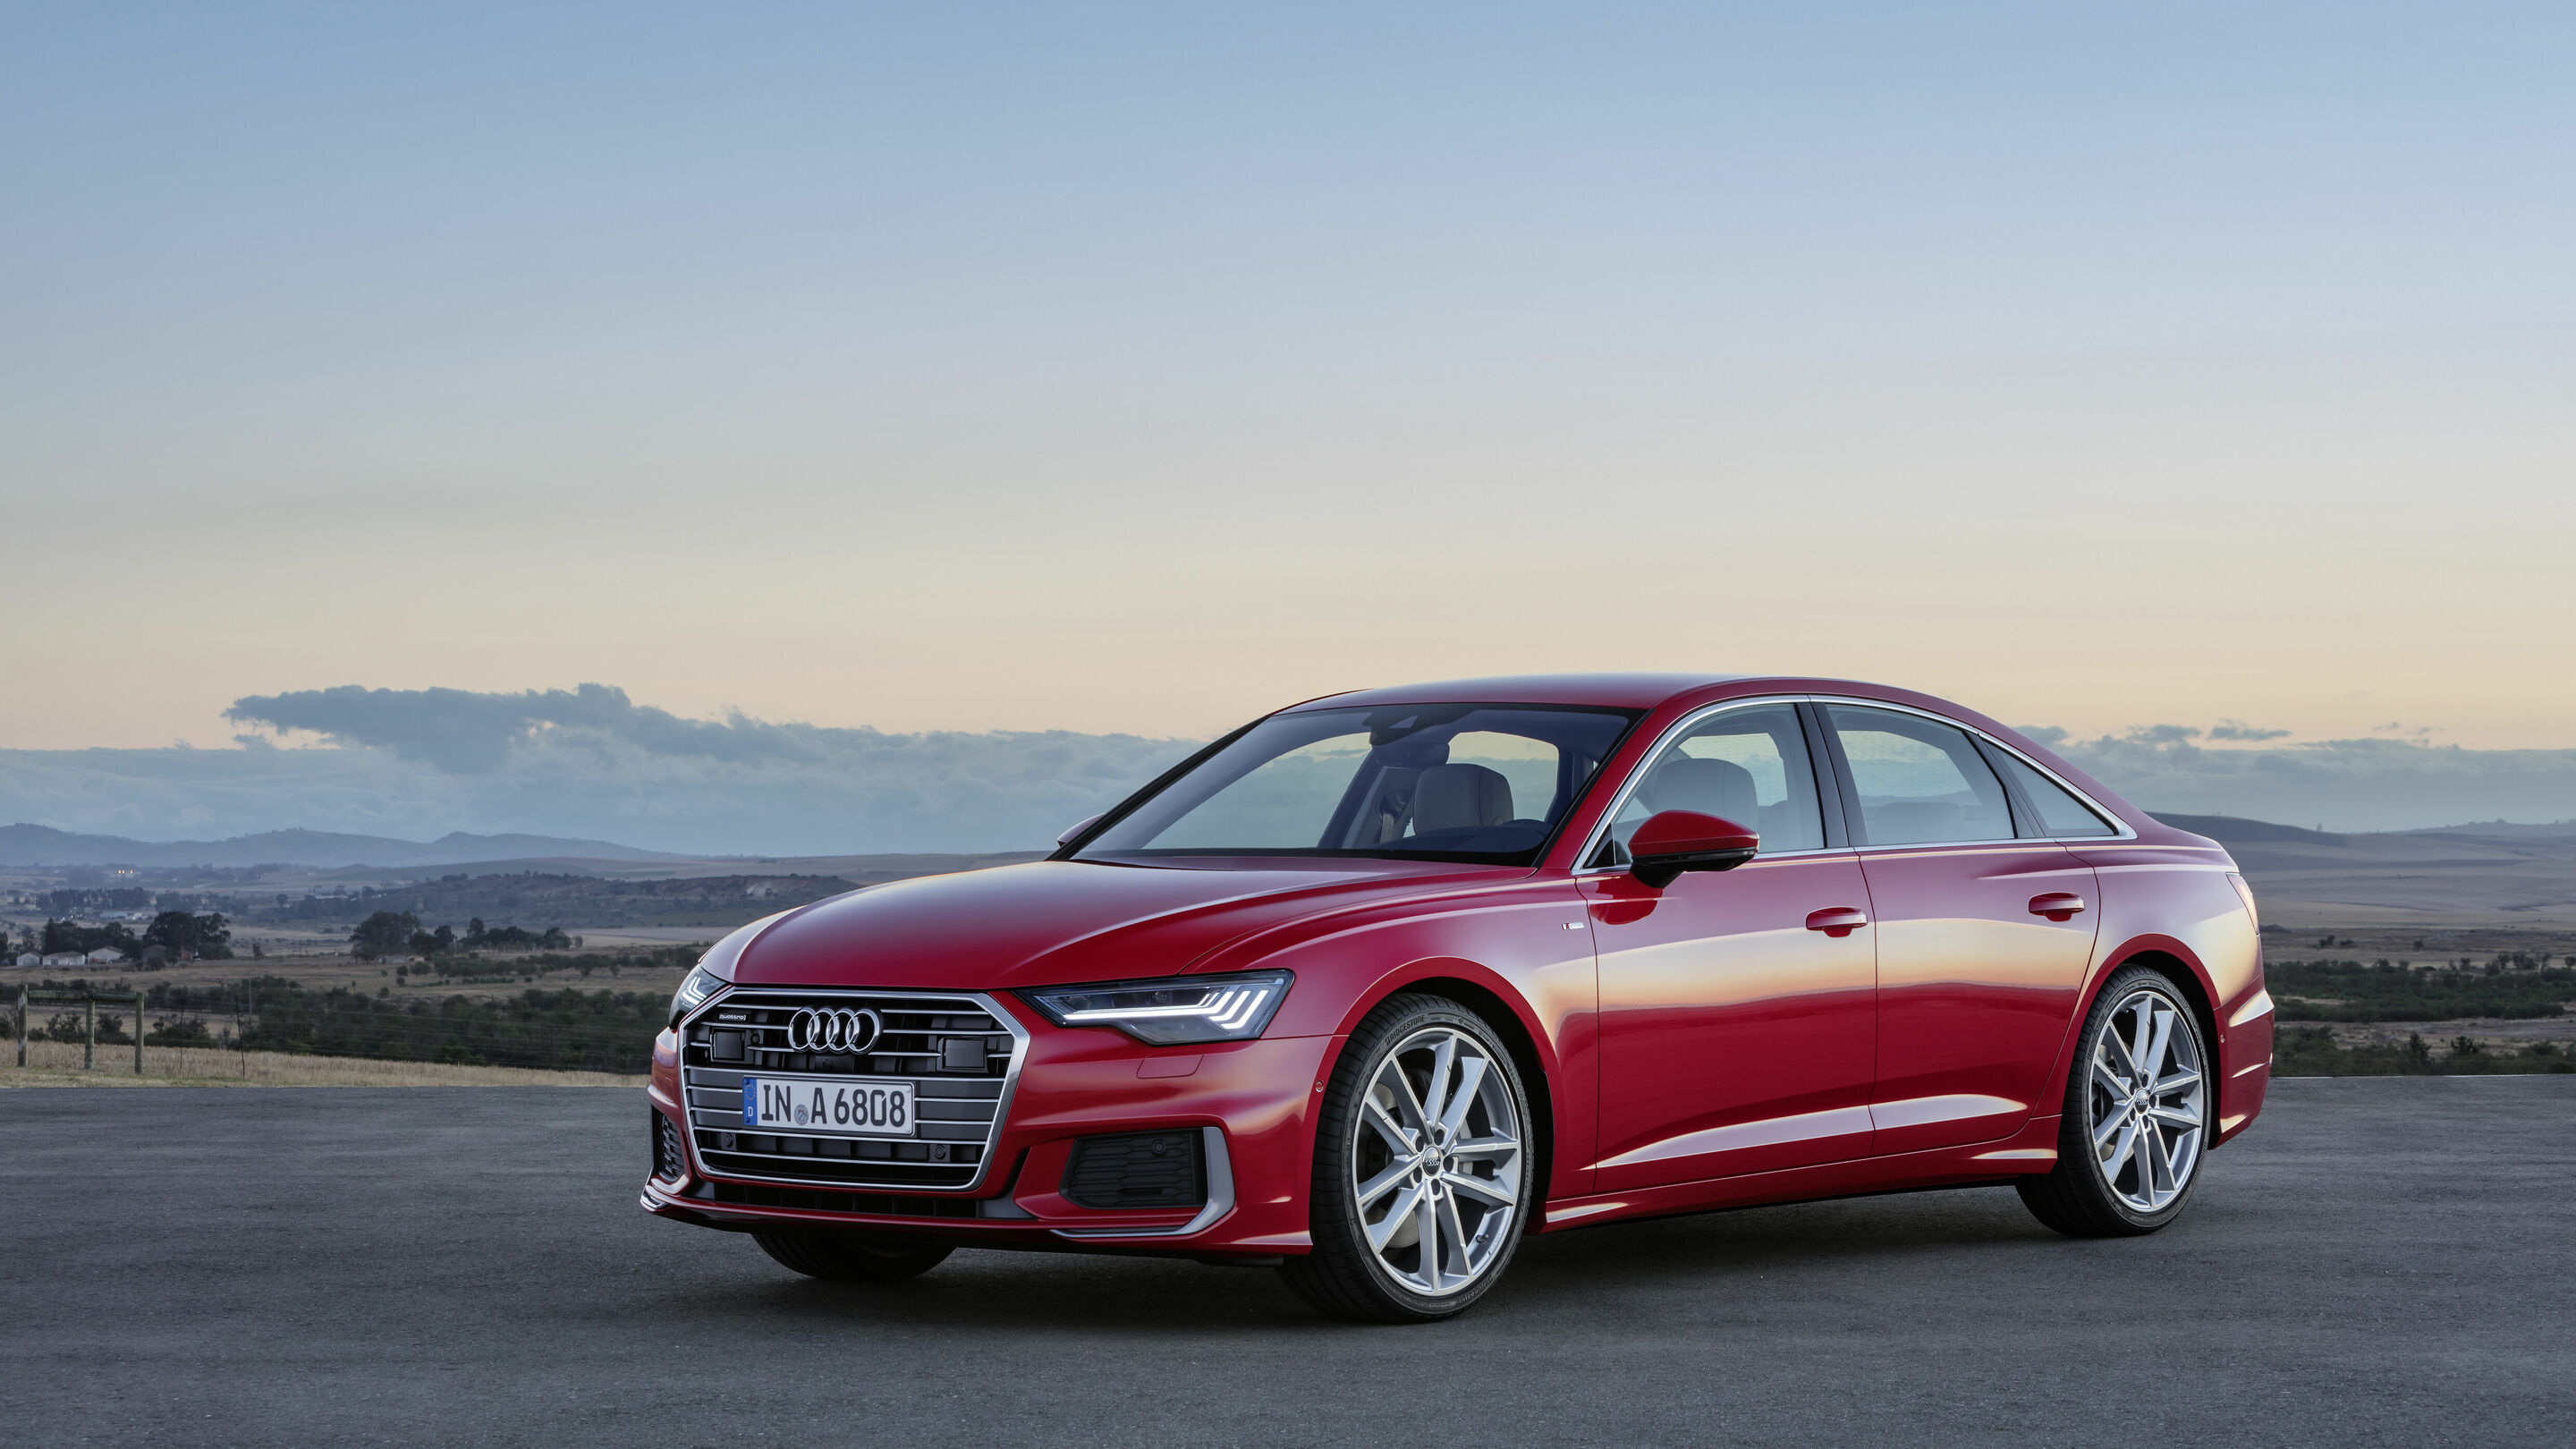 2019 Audi A6 Goes Higher-Tech for a Higher Price